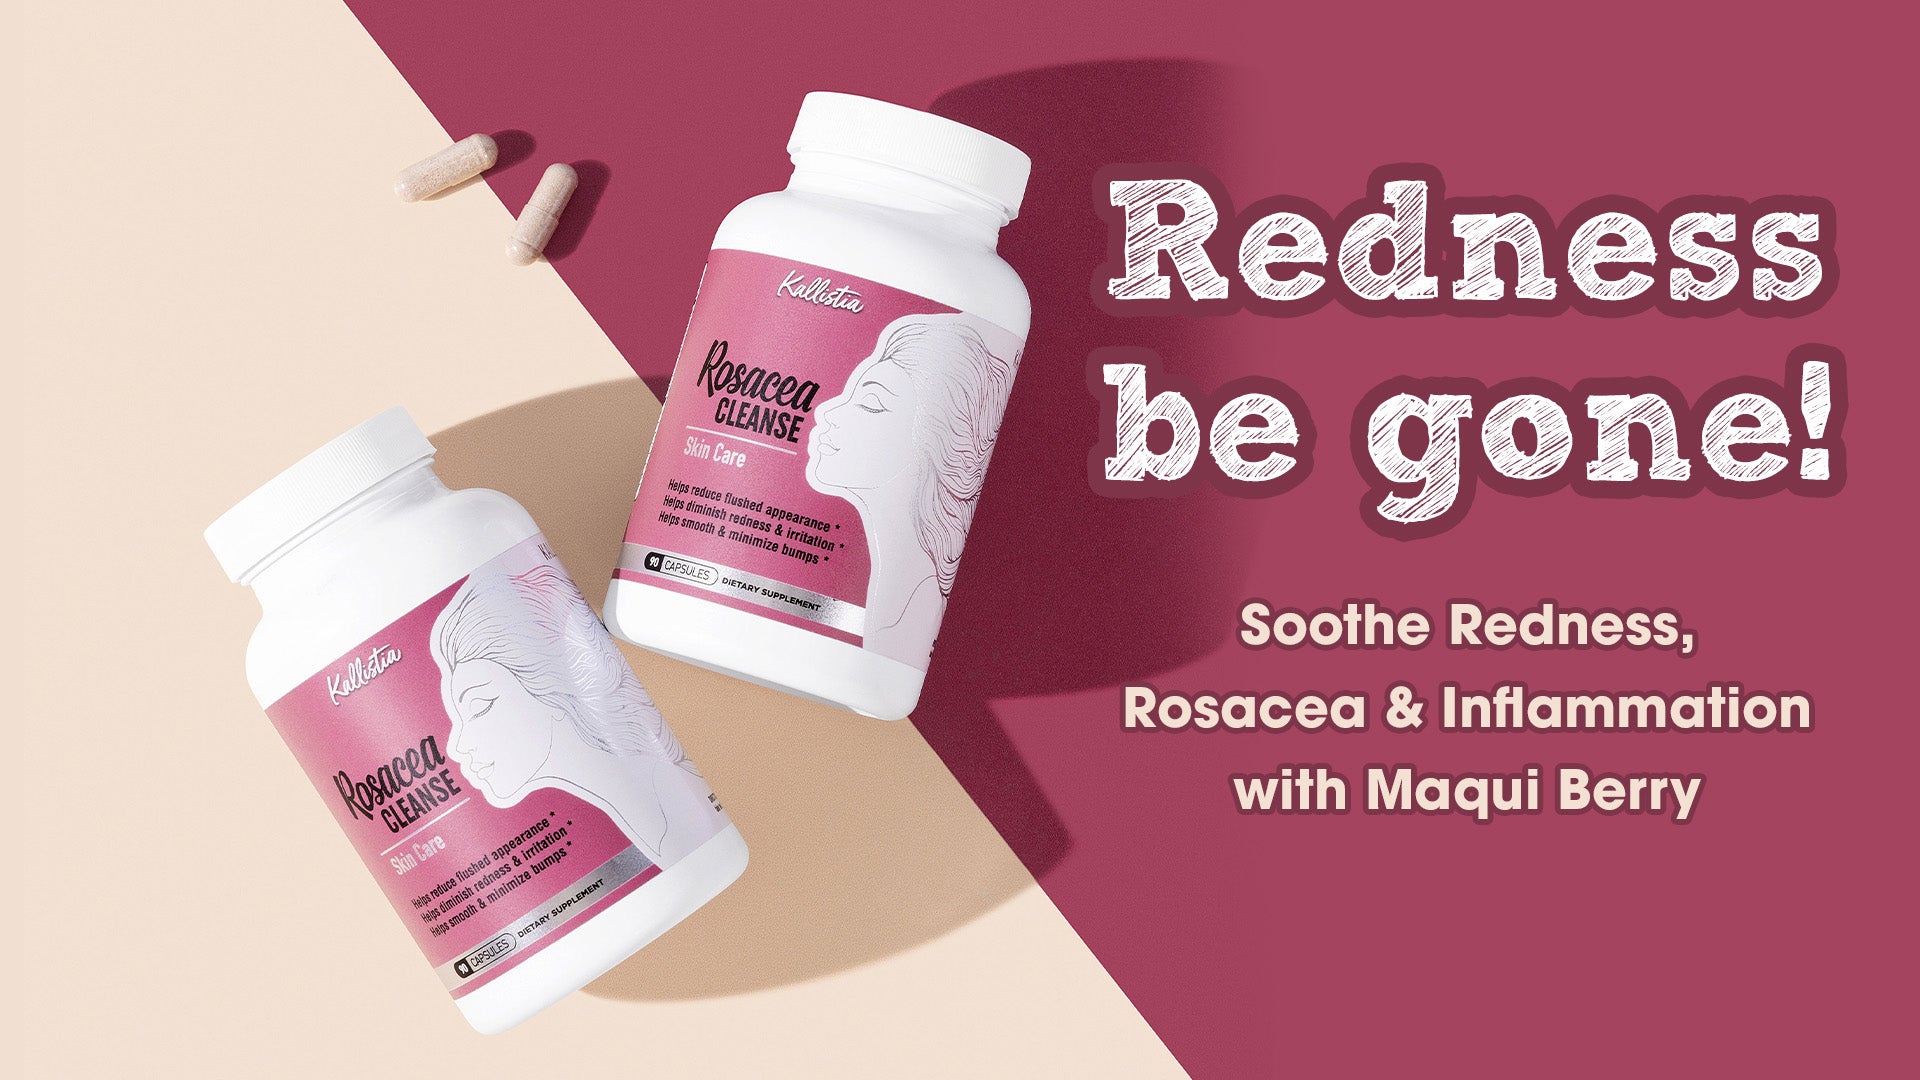 Soothe Redness, Rosacea & Inflammation with Maqui Berry